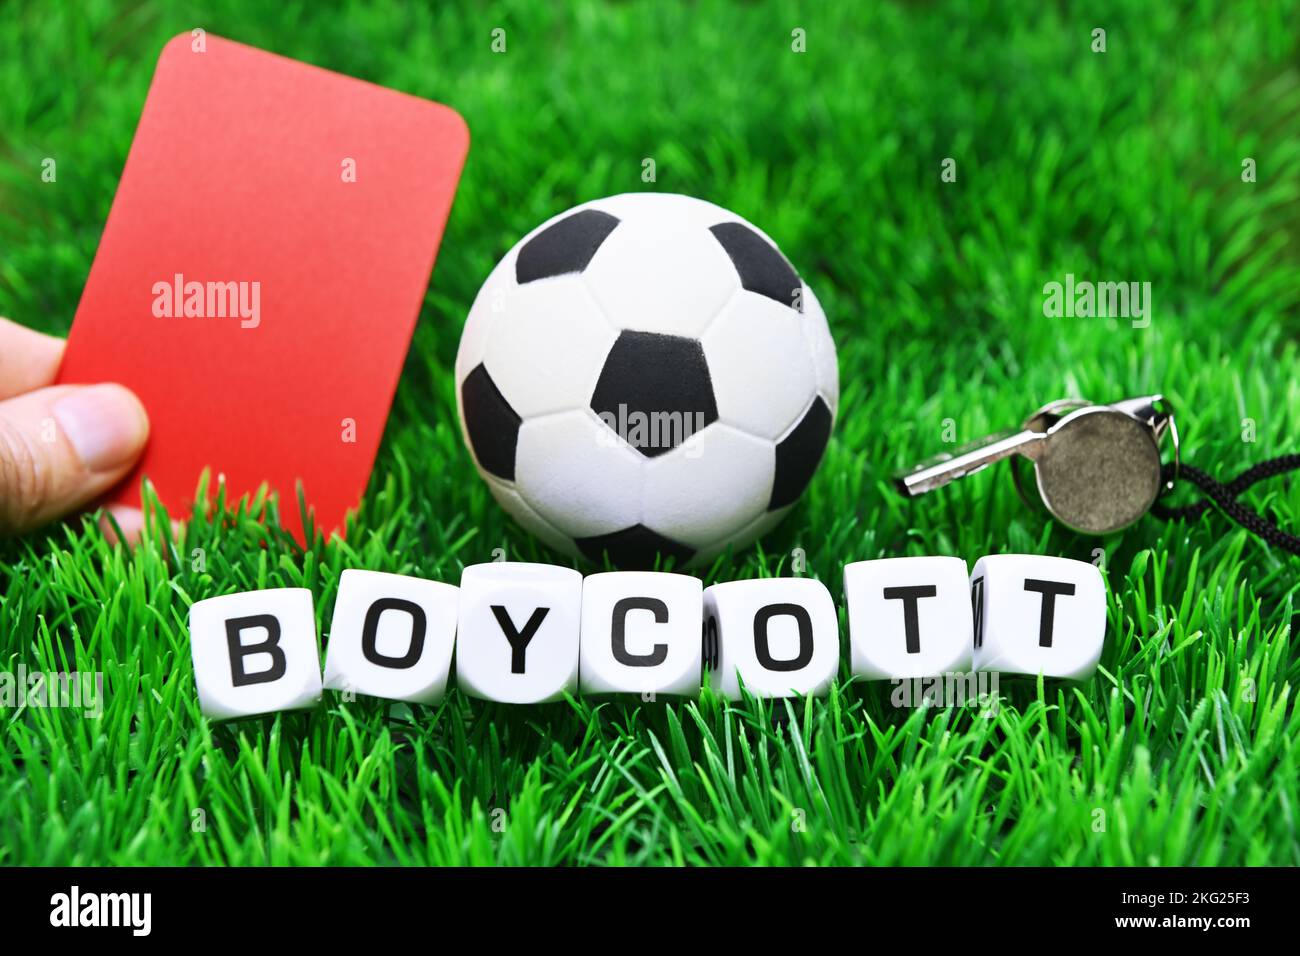 Football and red card, boycott of the football world cup, symbolic image Stock Photo